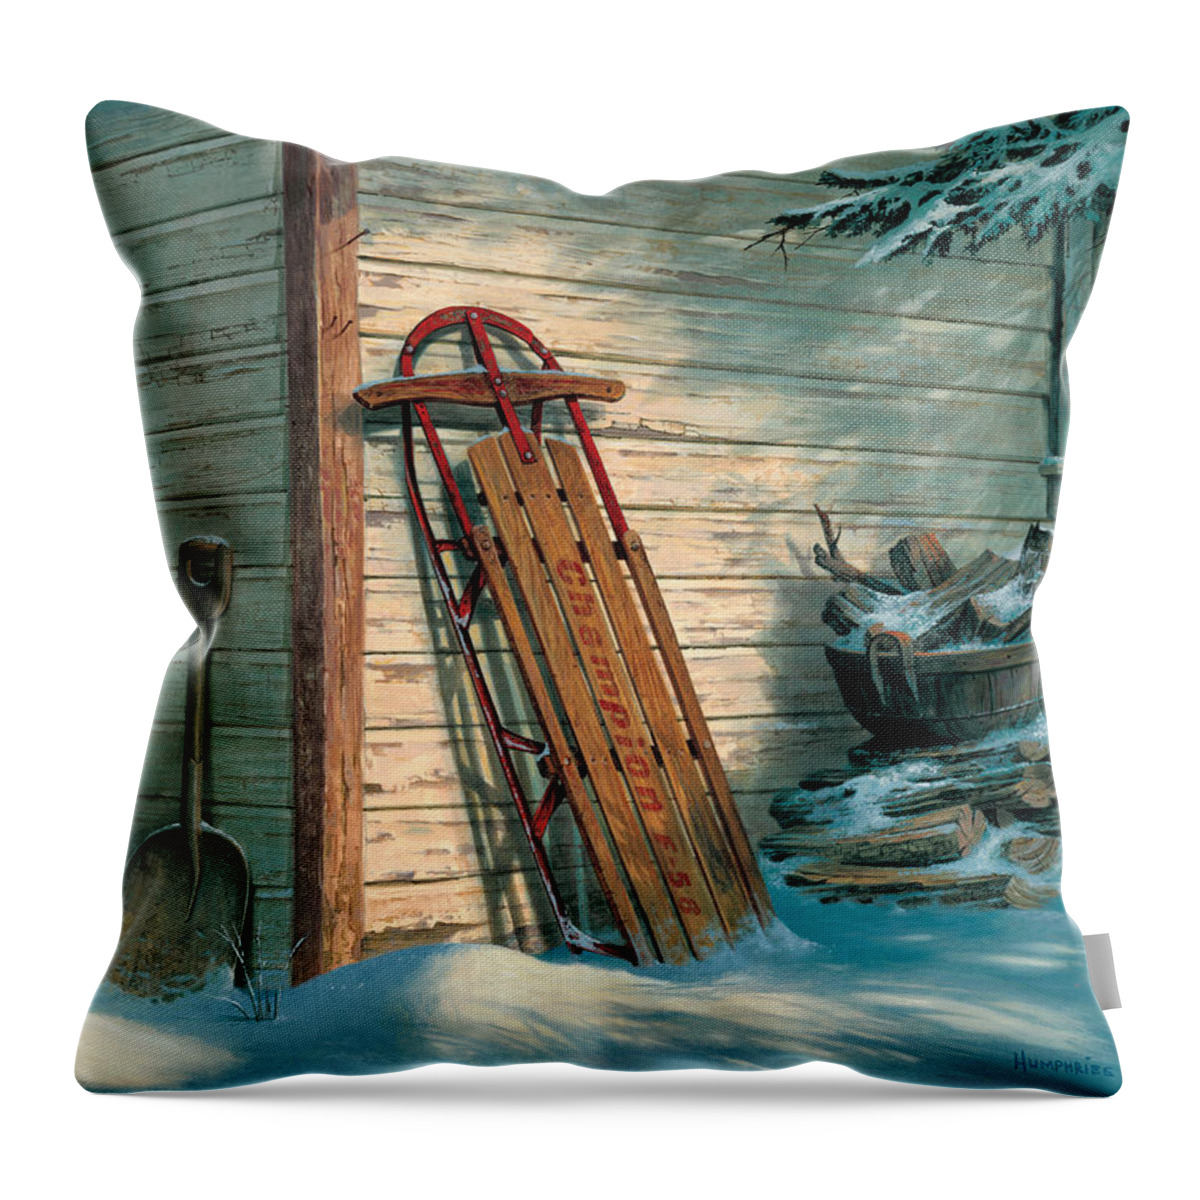 Michael Humphries Throw Pillow featuring the painting Yesterday's Champioin by Michael Humphries